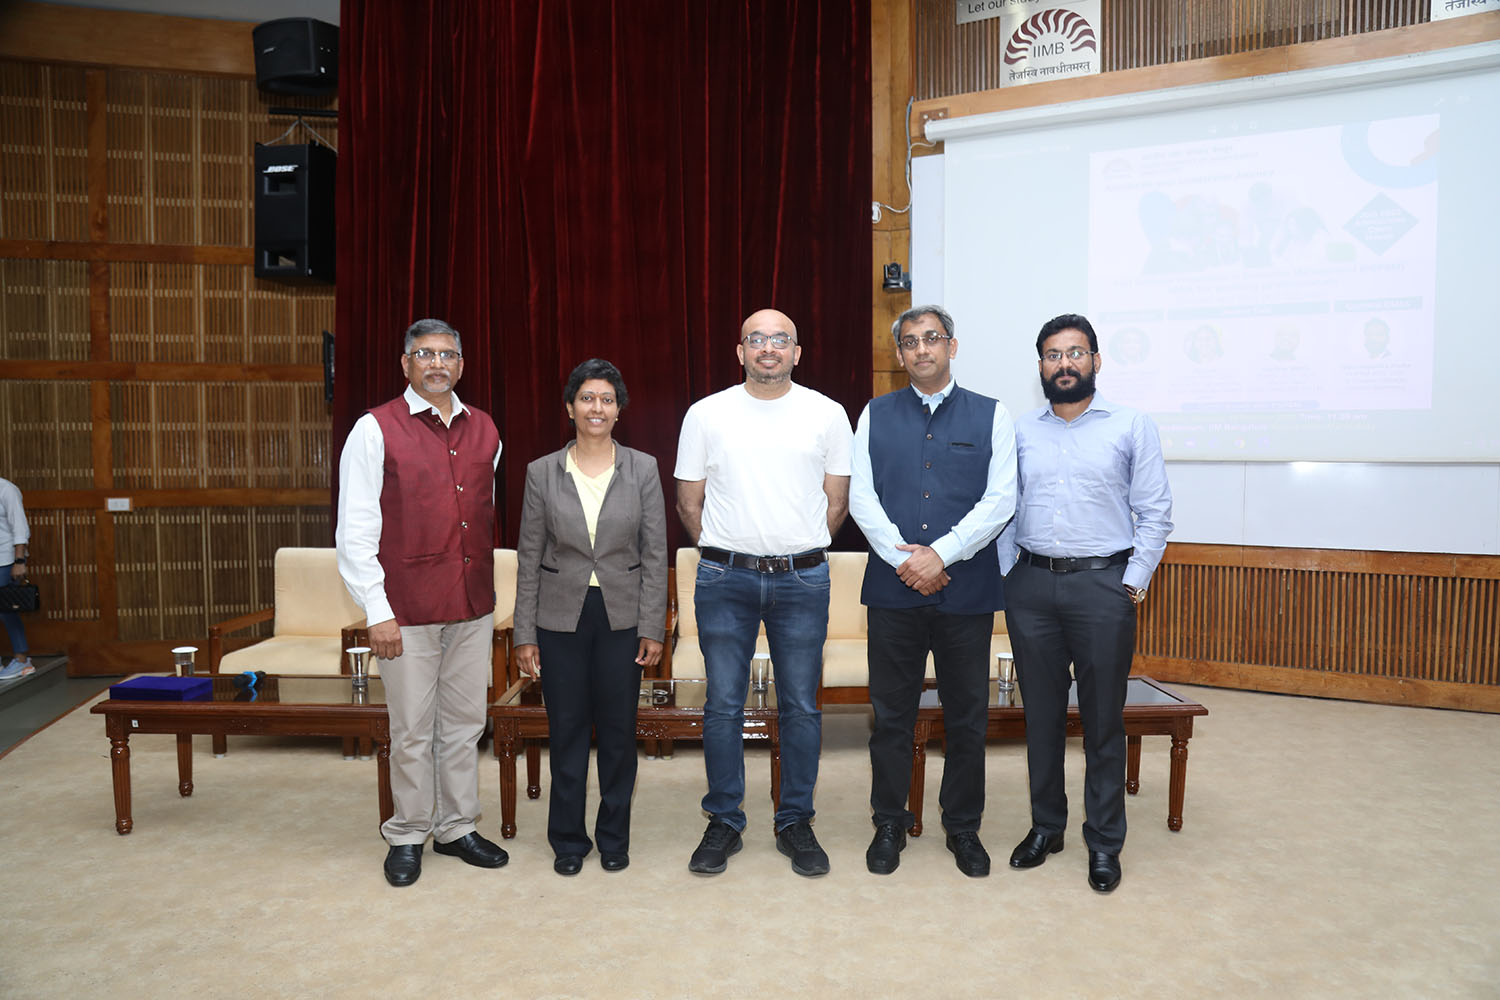 The Admissions Open House for the Post Graduate Programme in Enterprise Management (PGPEM) was conducted on 16th October 2022. Representatives from the Marketing Office at IIMB, PGPEM alumni, current students and the PGPEM Chairperson, Prof. Allen P Ugargol, were present to take questions from prospective students.